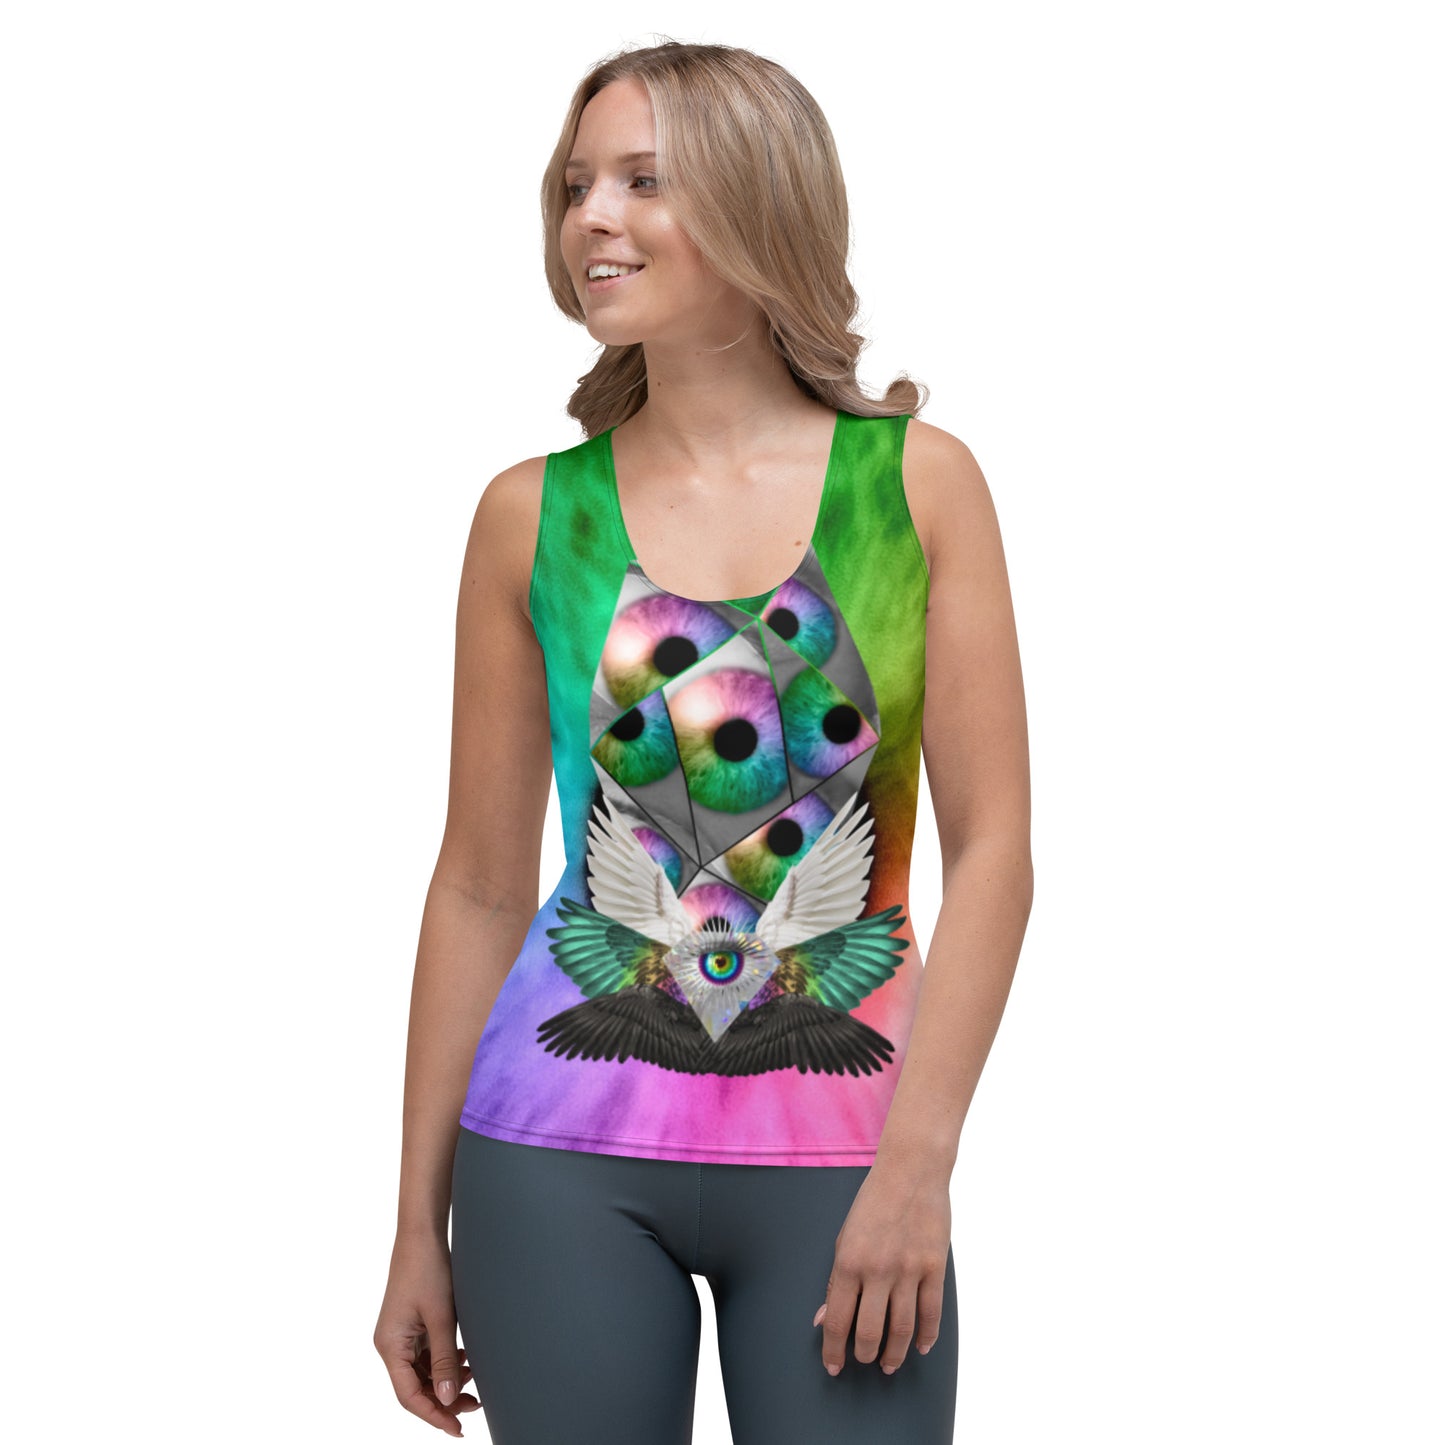 Seraphina Brand Abstract Print Psychedelic Festival Rave All Over Print TANK TOP